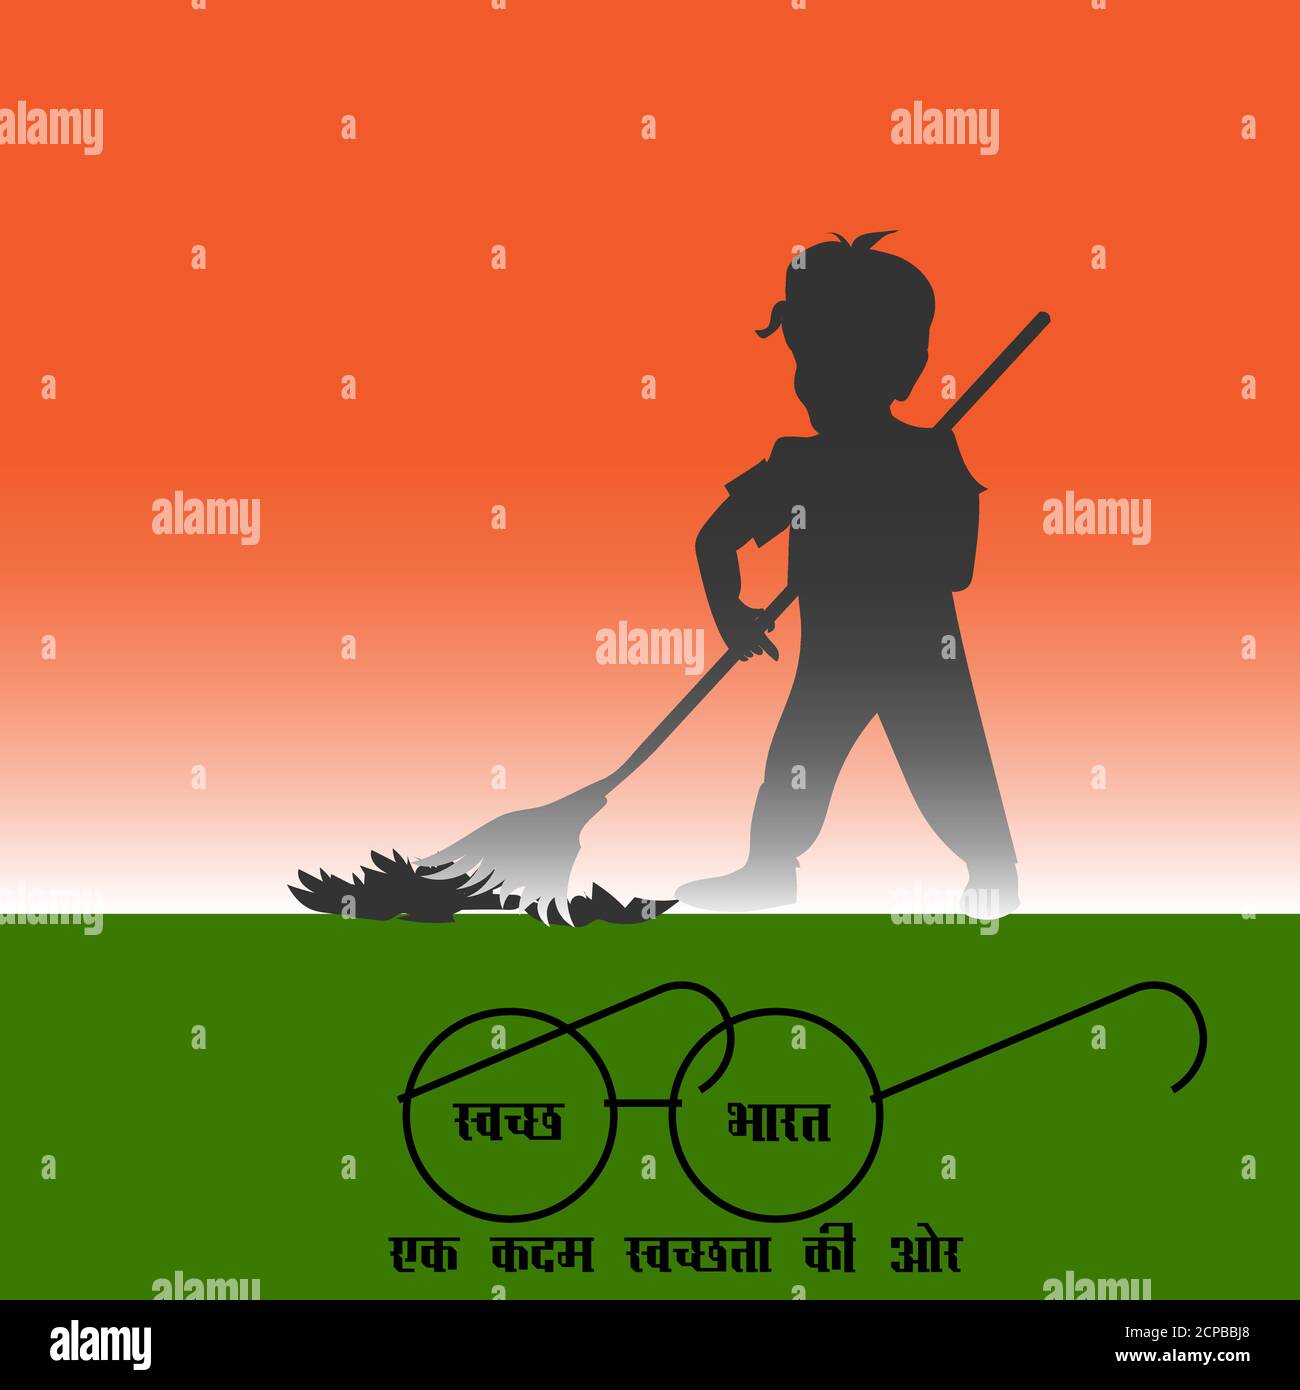 Top 999+ swachh bharat drawing competition images – Amazing Collection  swachh bharat drawing competition images Full 4K